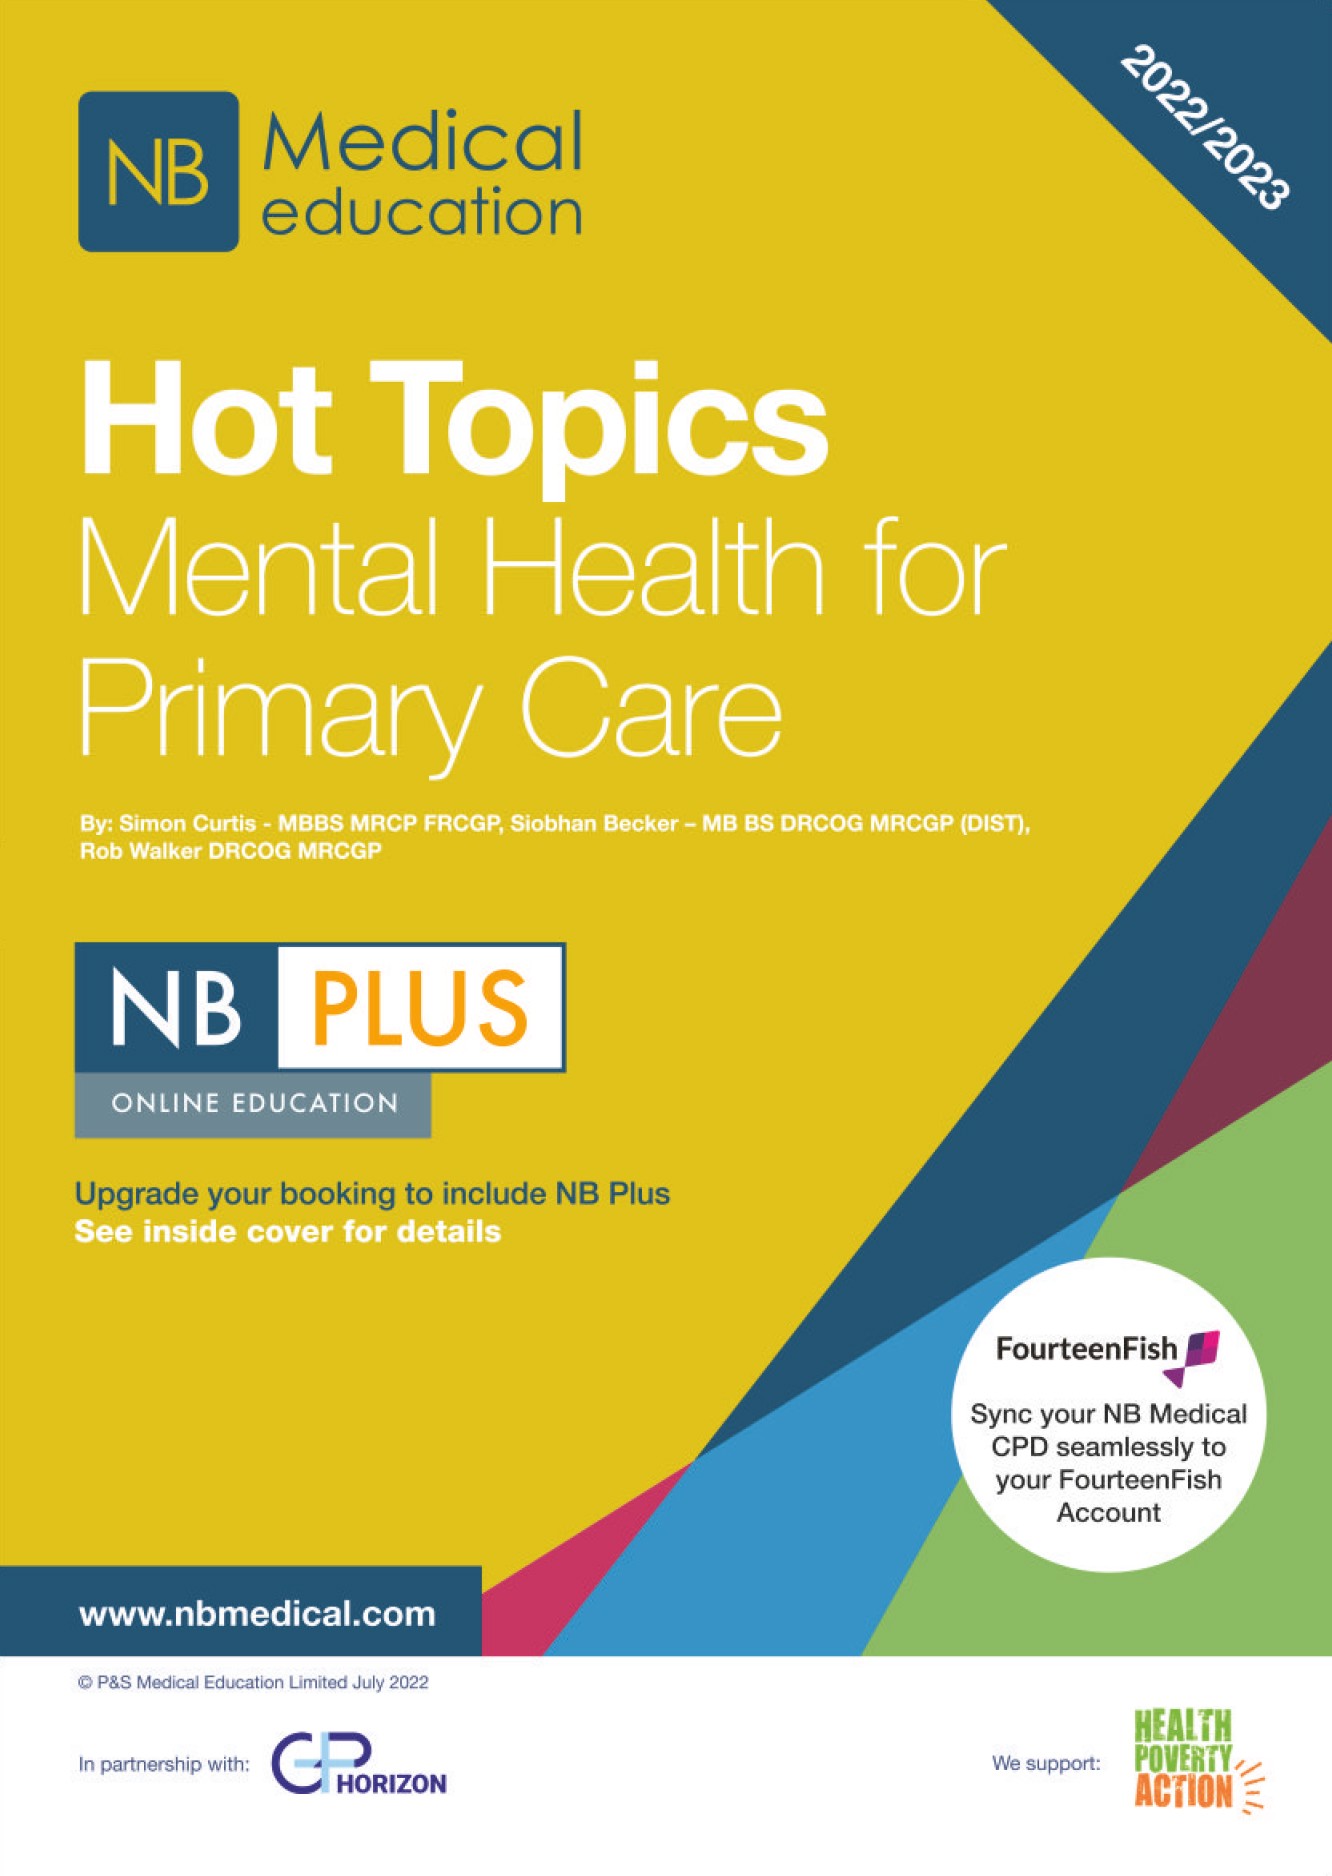 Hot Topics Mental Health in Primary Care 2022-2023 Booklet